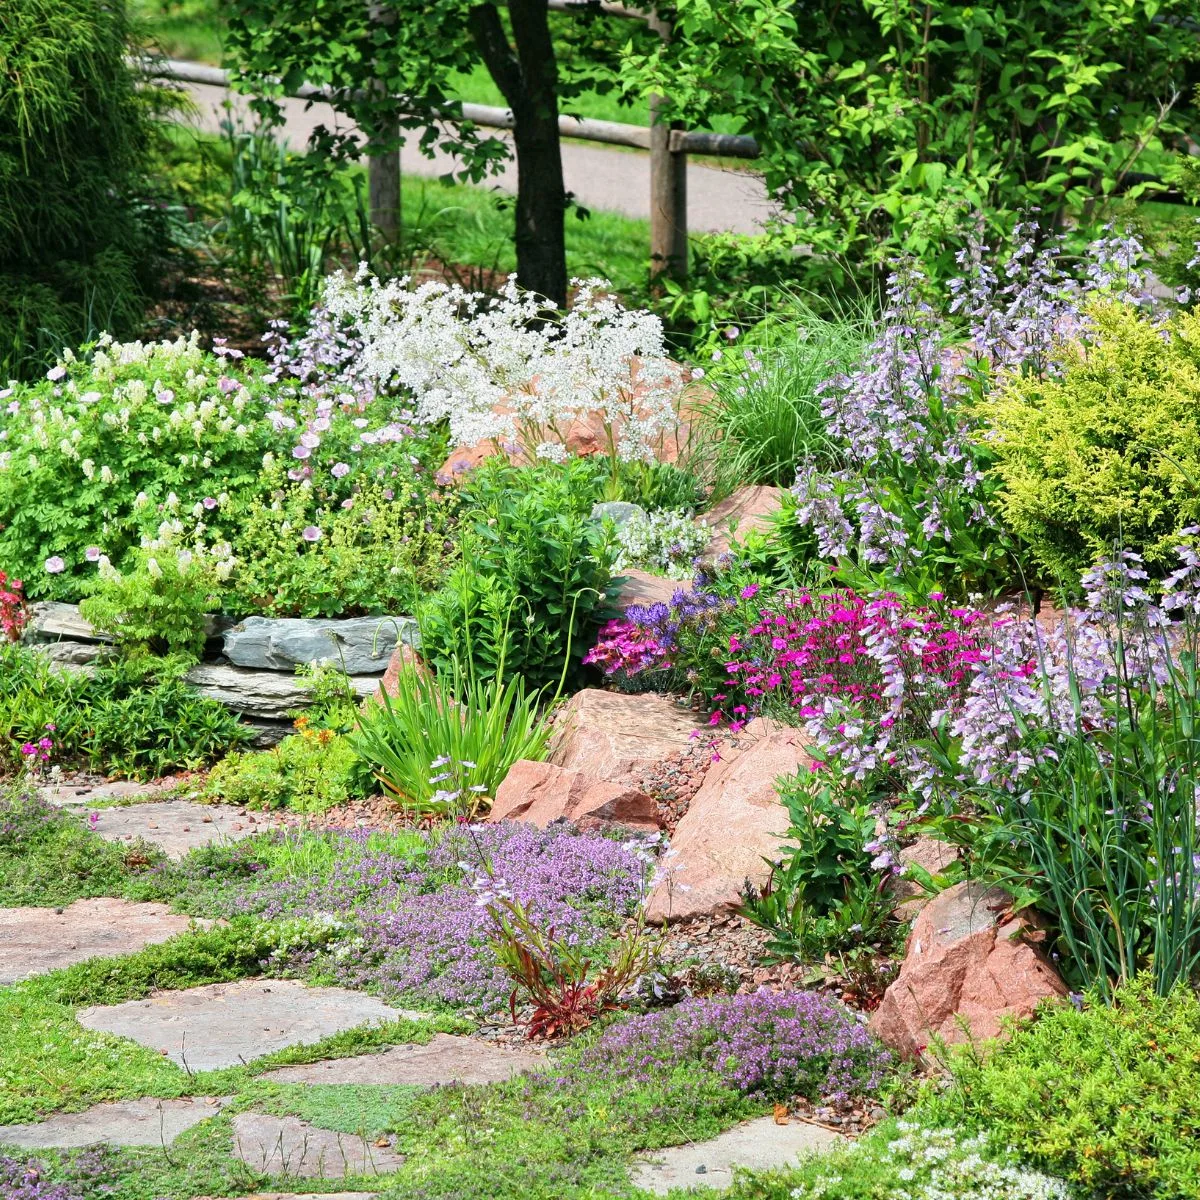 A rock garden at the end of the woods, with an explosion of blooms in many pretty colors: white, pink, lavender and purple. 